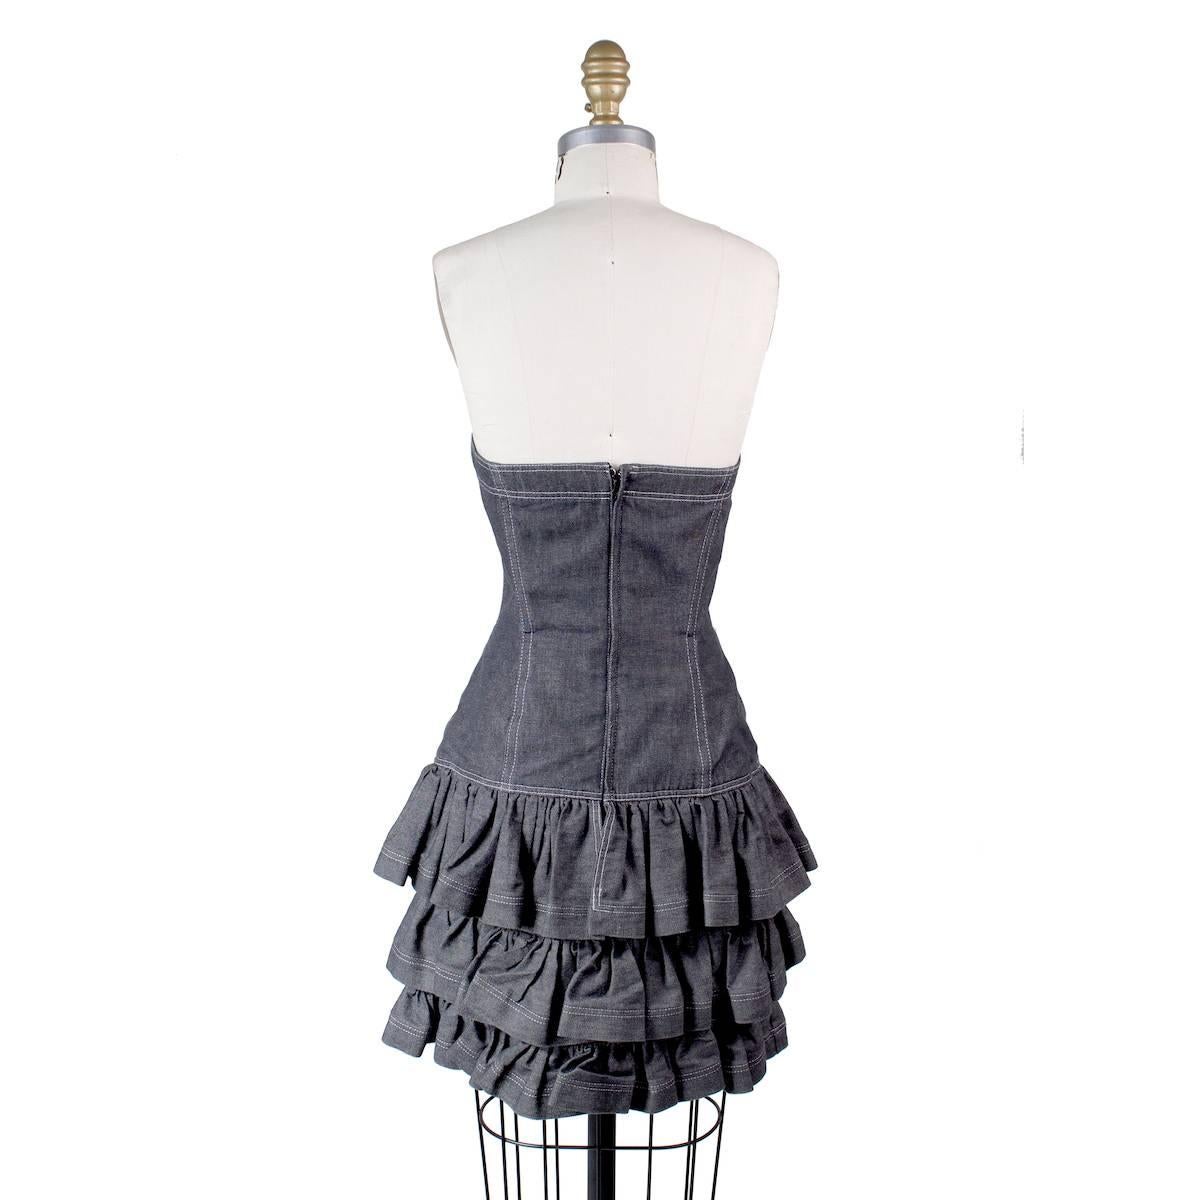 This is a strapless dress by Patrick Kelly circa 1980s.  It features a sweetheart bust and ruffled skirt.  Grey denim with contrast stitching.